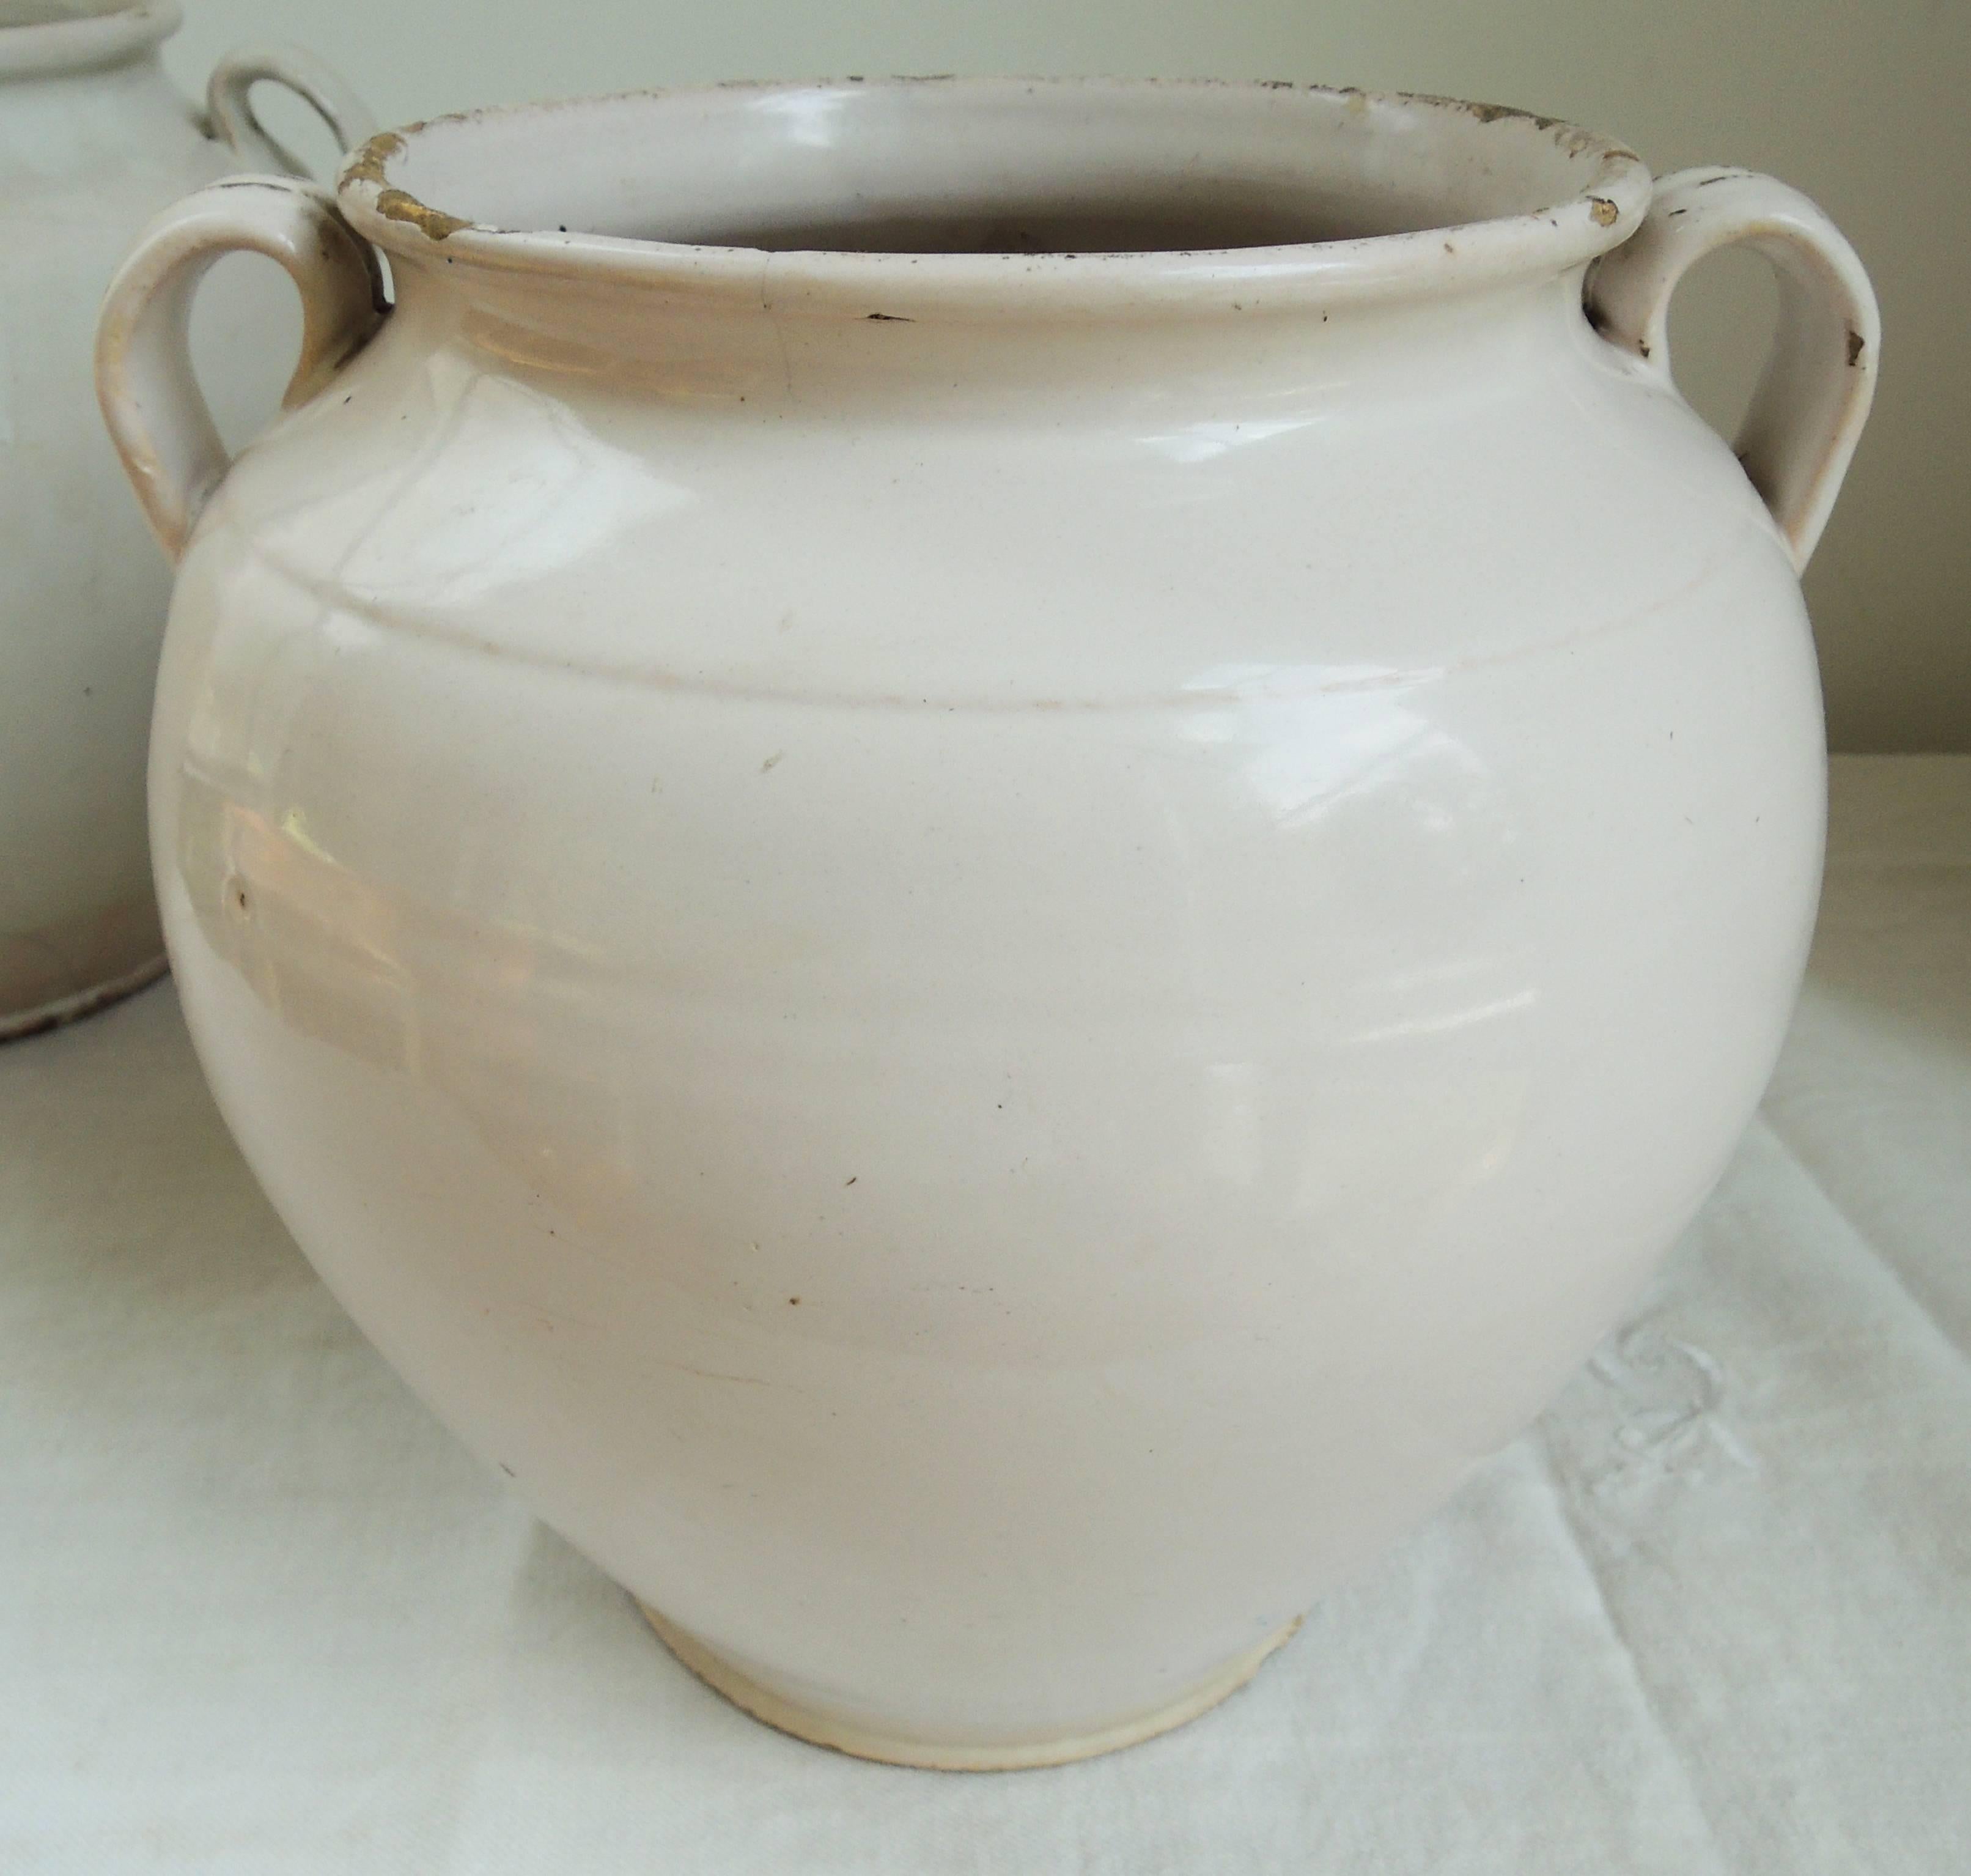 Late 19th century white glazed ceramic kitchen storage jars.
Two which are a very near match.
Priced individually.